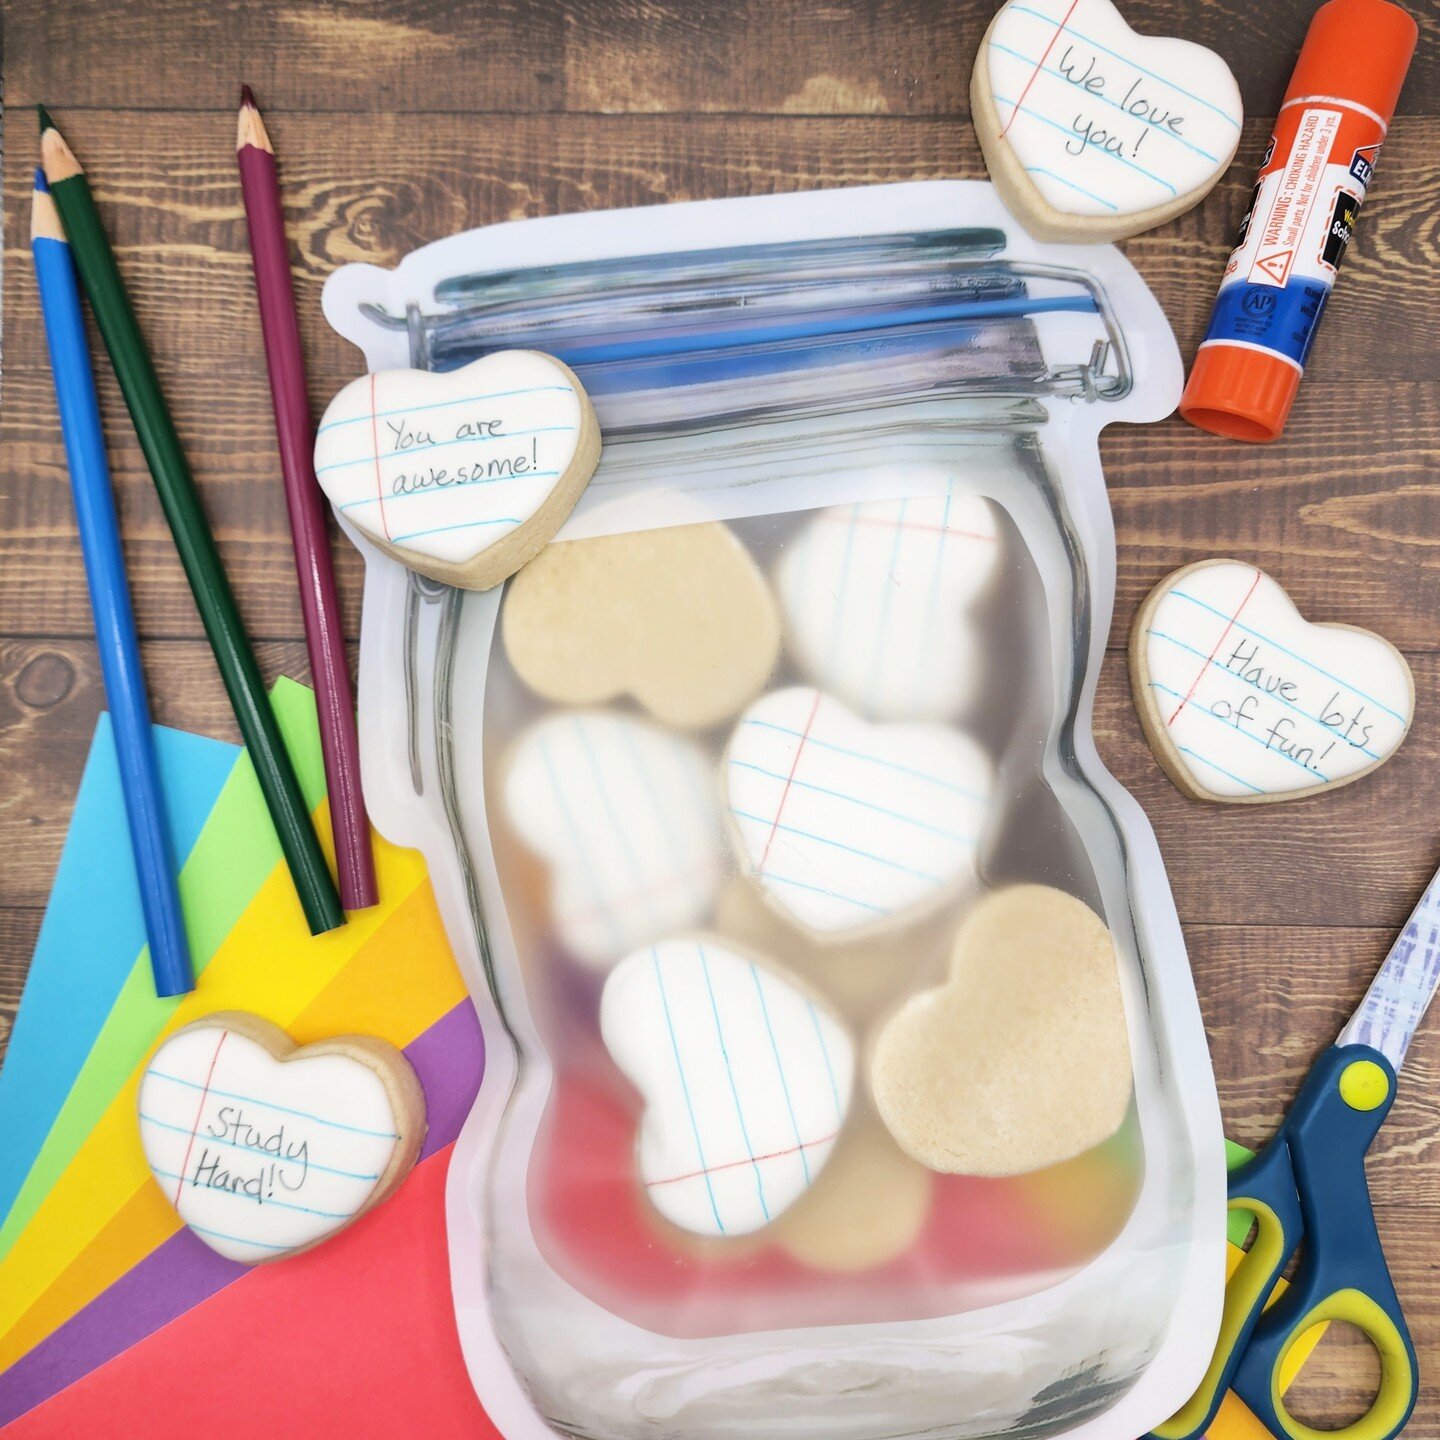 🌸Sweet Treats for School!🌸

Hey there, cookie lovers! The school bells are about to ring, and I have something special in store for you! 💕 Introducing my Limited Edition Back-to-School Mini Heart Cookies! 🎒✏️

Imagine opening your lunchbox to fin